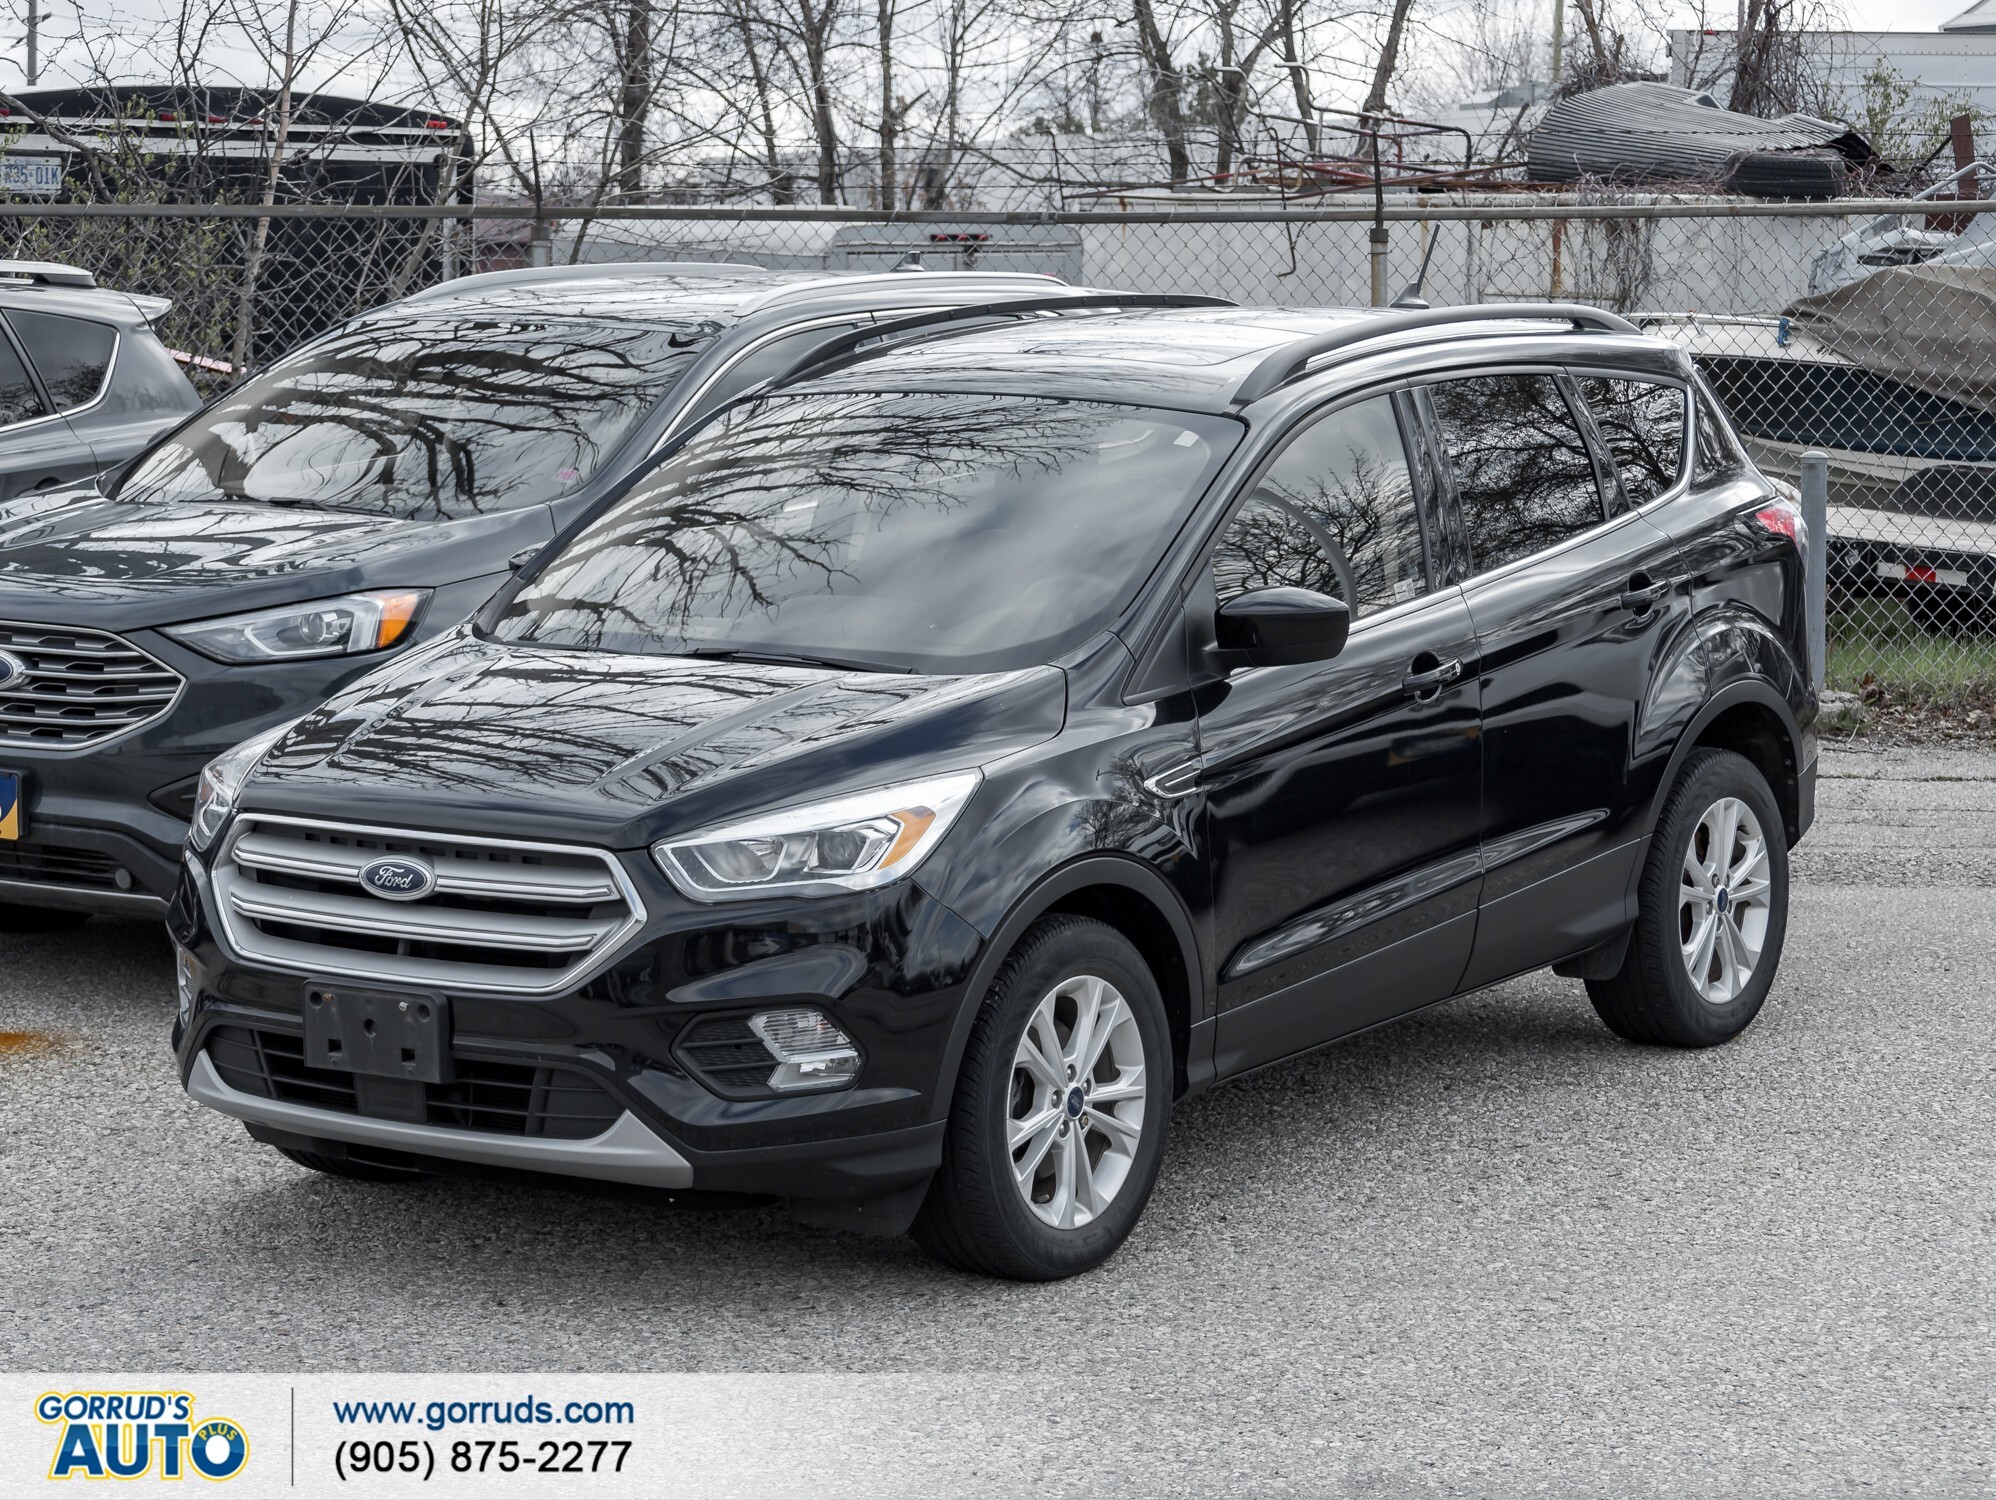 2018 Ford Escape SEL|AWD|LEATHER|SYNC 3|BACK UP SENSORS